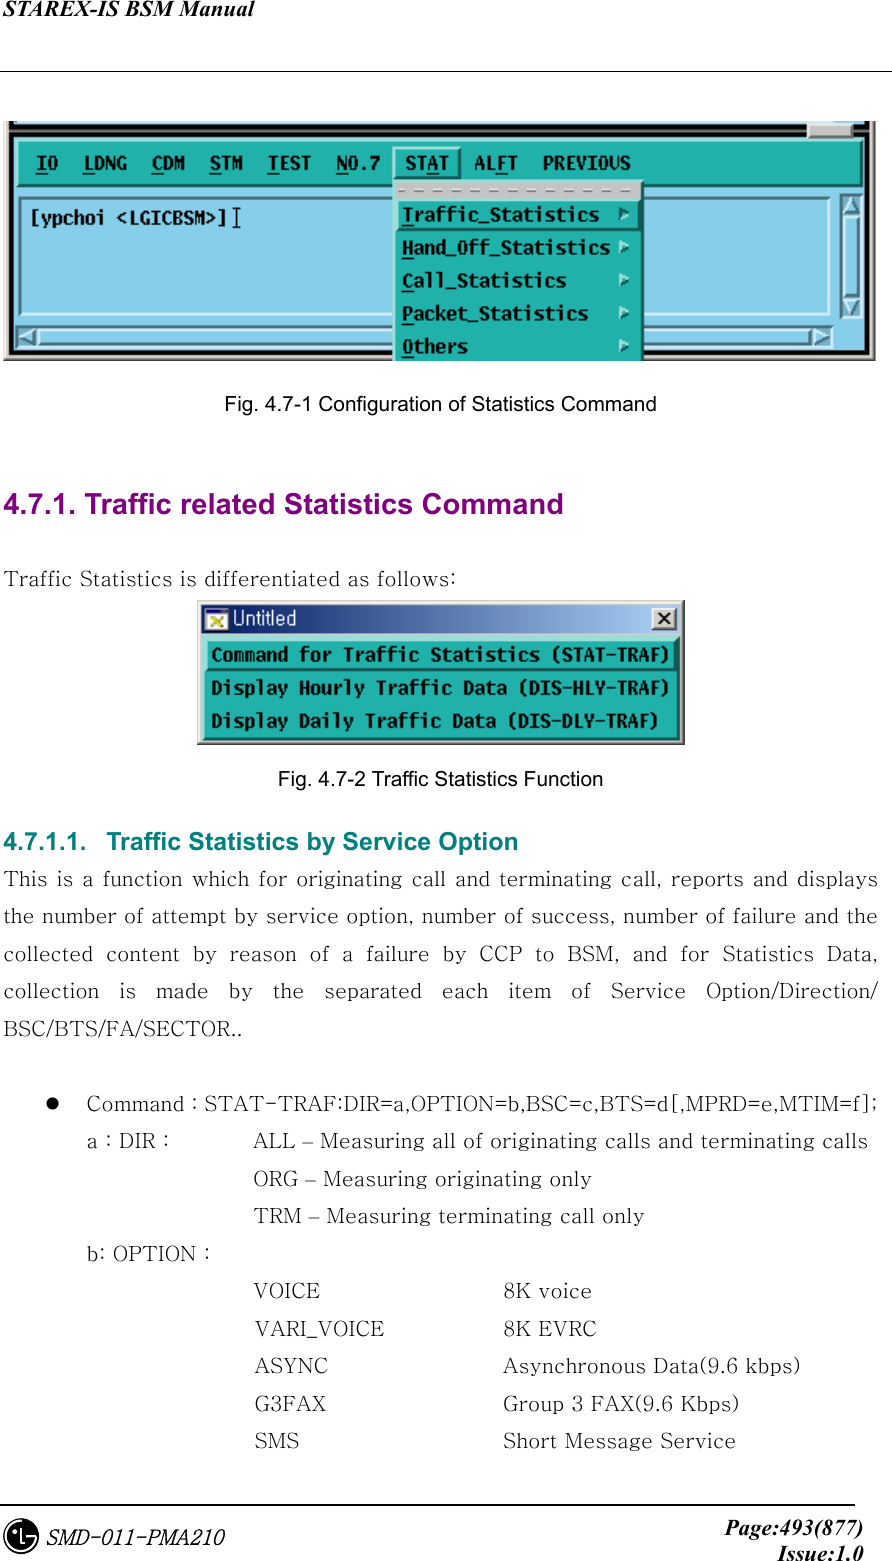 STAREX-IS BSM Manual     Page:493(877)Issue:1.0SMD-011-PMA210   Fig. 4.7-1 Configuration of Statistics Command  4.7.1. Traffic related Statistics Command  Traffic Statistics is differentiated as follows:  Fig. 4.7-2 Traffic Statistics Function 4.7.1.1.   Traffic Statistics by Service Option This is a function which for originating call and terminating call, reports and displays the number of attempt by service option, number of success, number of failure and the collected  content  by  reason  of  a  failure  by  CCP  to  BSM,  and  for  Statistics  Data, collection  is  made  by  the  separated  each  item  of  Service  Option/Direction/ BSC/BTS/FA/SECTOR..    Command : STAT-TRAF:DIR=a,OPTION=b,BSC=c,BTS=d[,MPRD=e,MTIM=f]; a : DIR :      ALL – Measuring all of originating calls and terminating calls             ORG – Measuring originating only               TRM – Measuring terminating call only b: OPTION :       VOICE             8K voice                 VARI_VOICE        8K EVRC                 ASYNC             Asynchronous Data(9.6 kbps)                 G3FAX             Group 3 FAX(9.6 Kbps)                 SMS               Short Message Service 